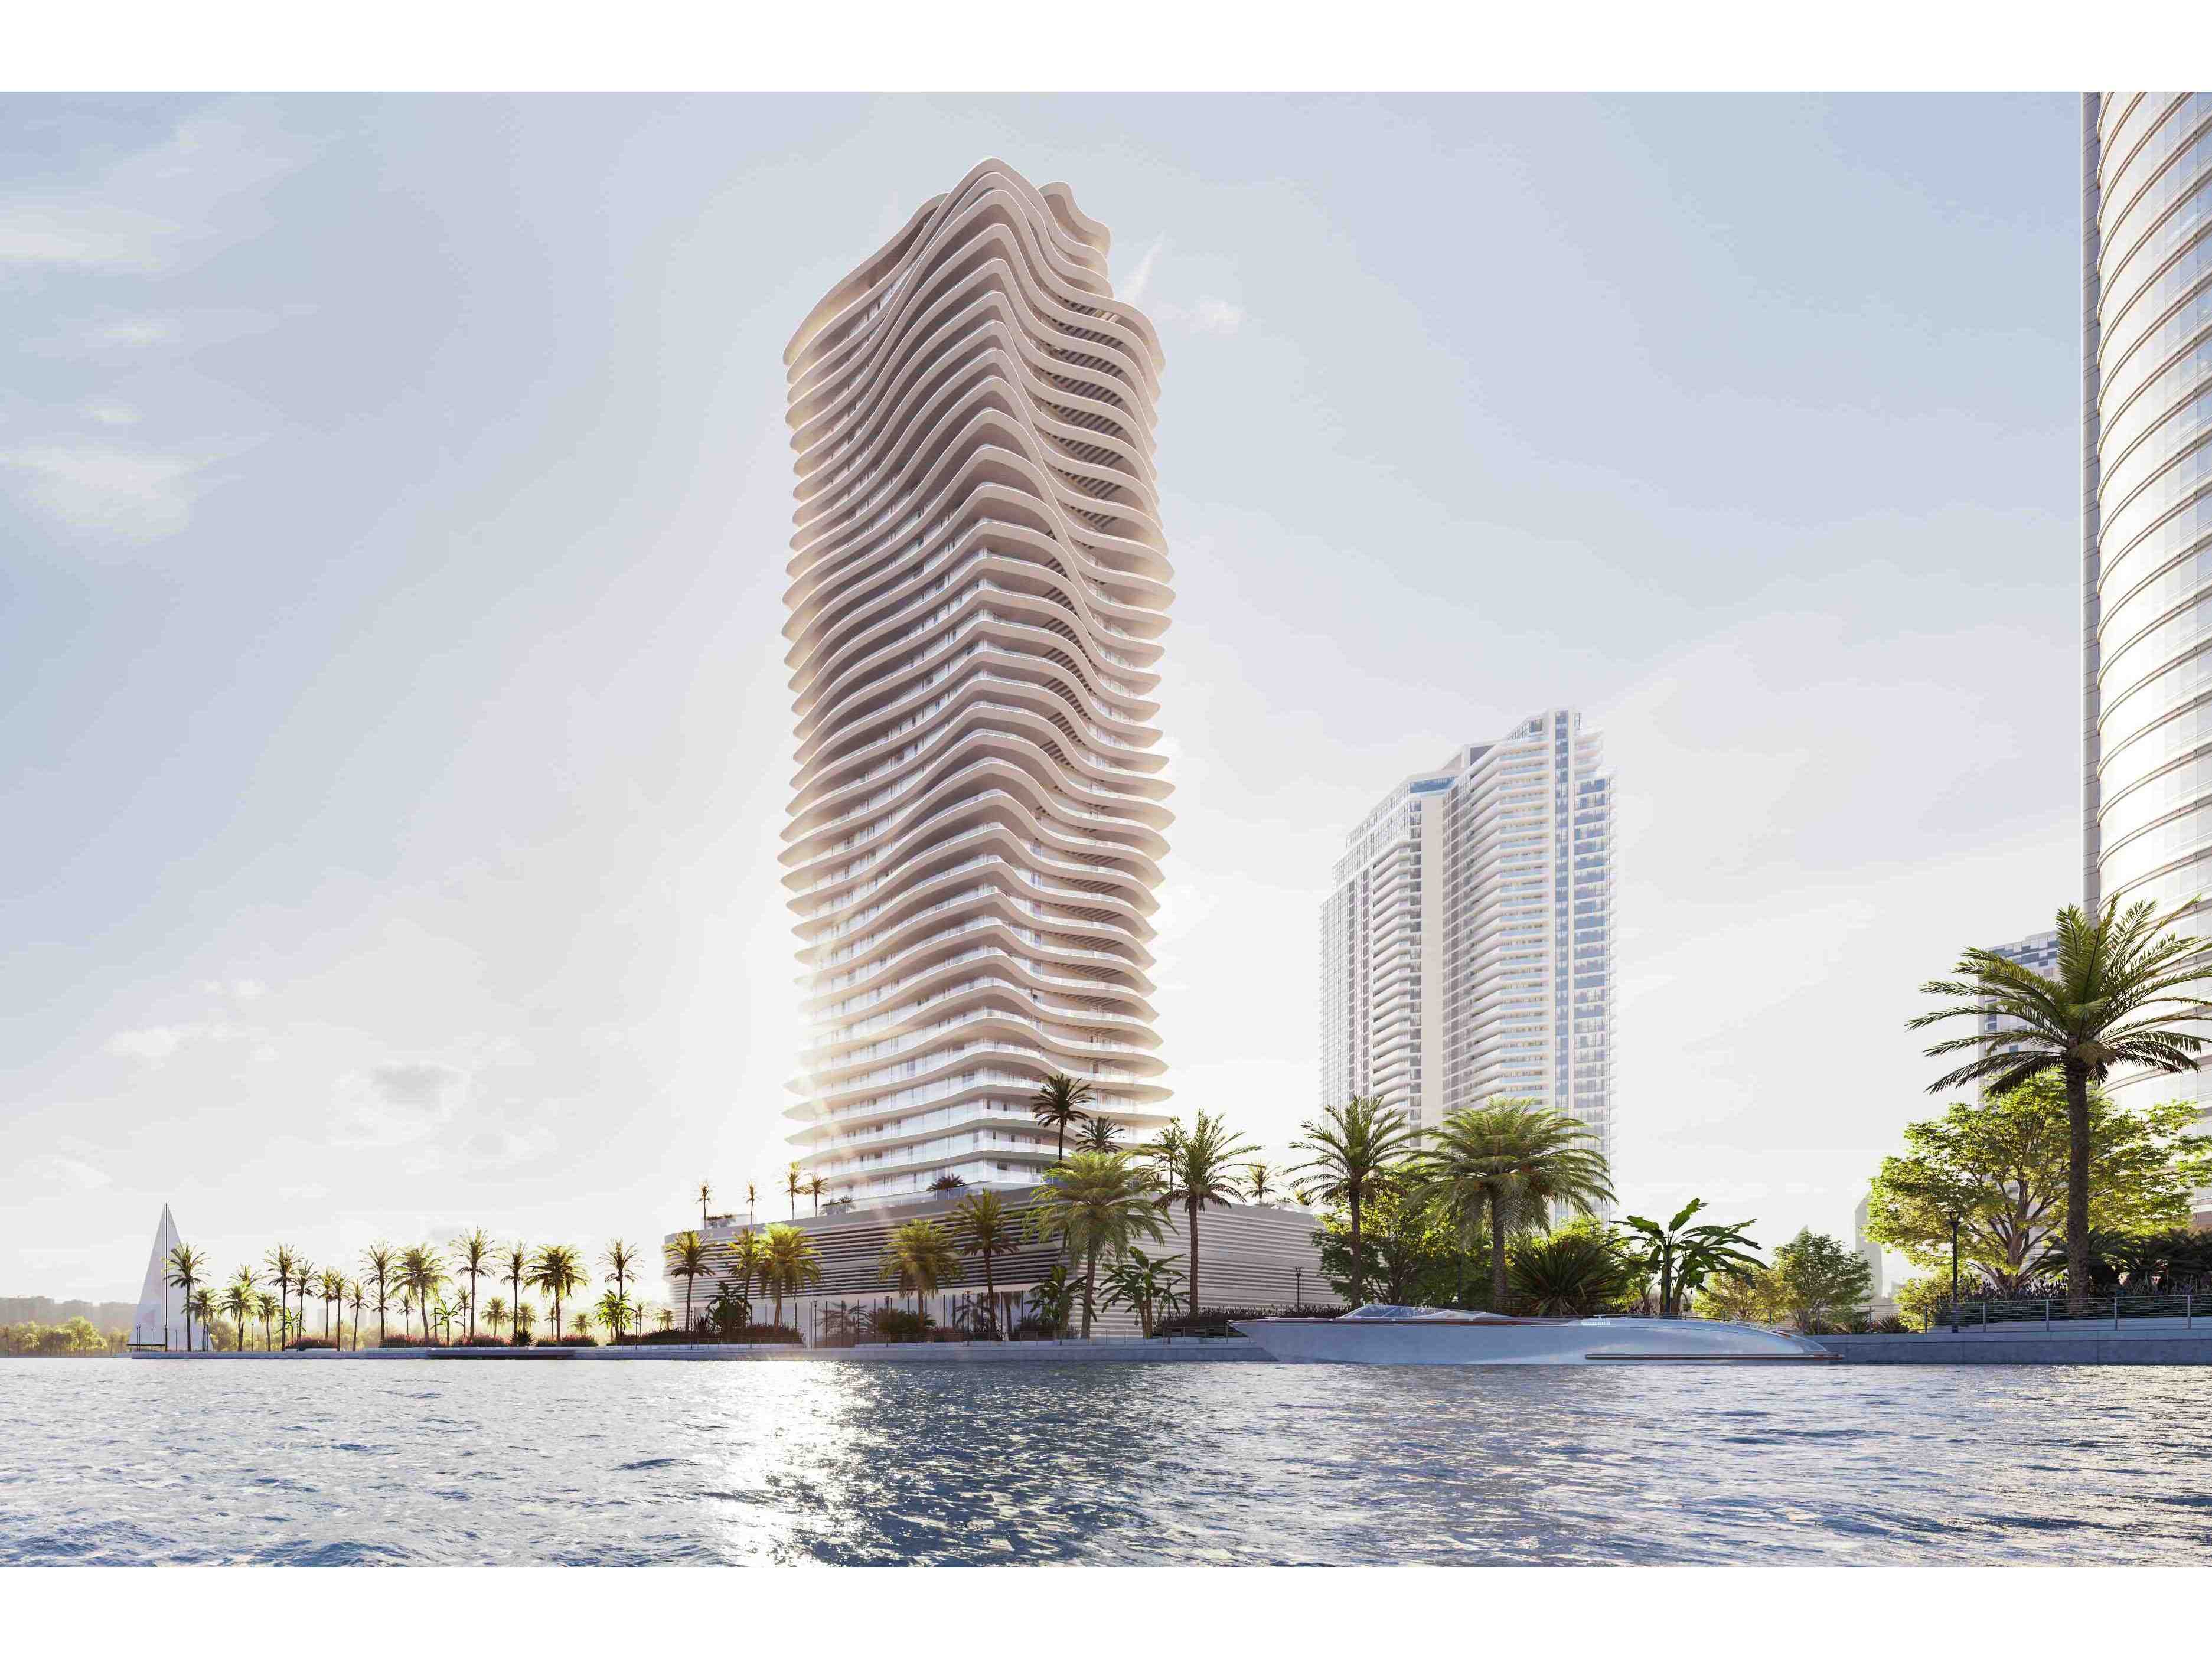 Elie Saab Waterfront by Ohana, a new architectural wonder recently unveiled in Abu Dhabi